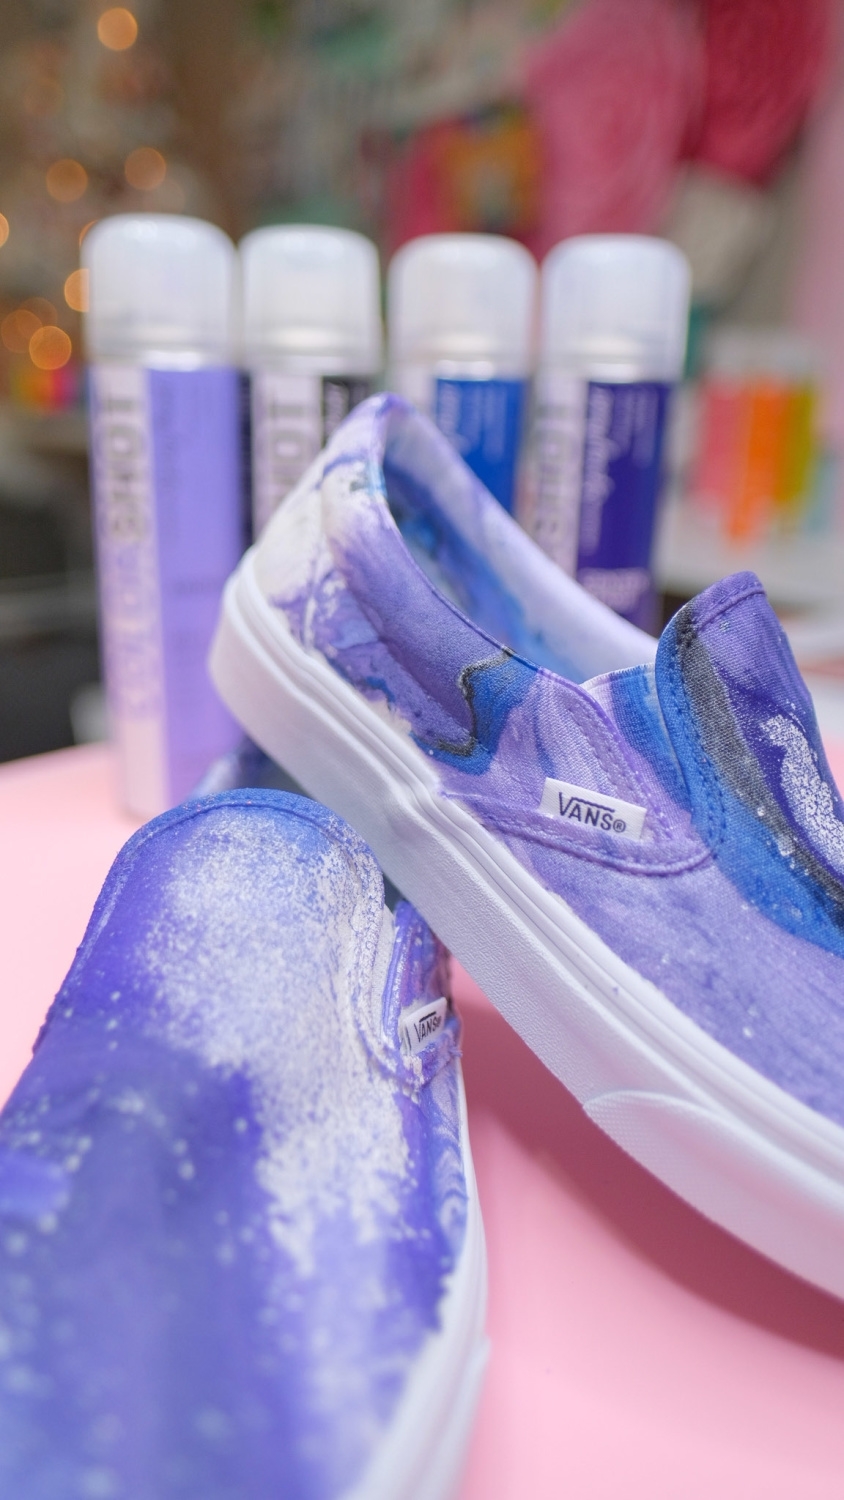 Let shoes dry and apply sealer